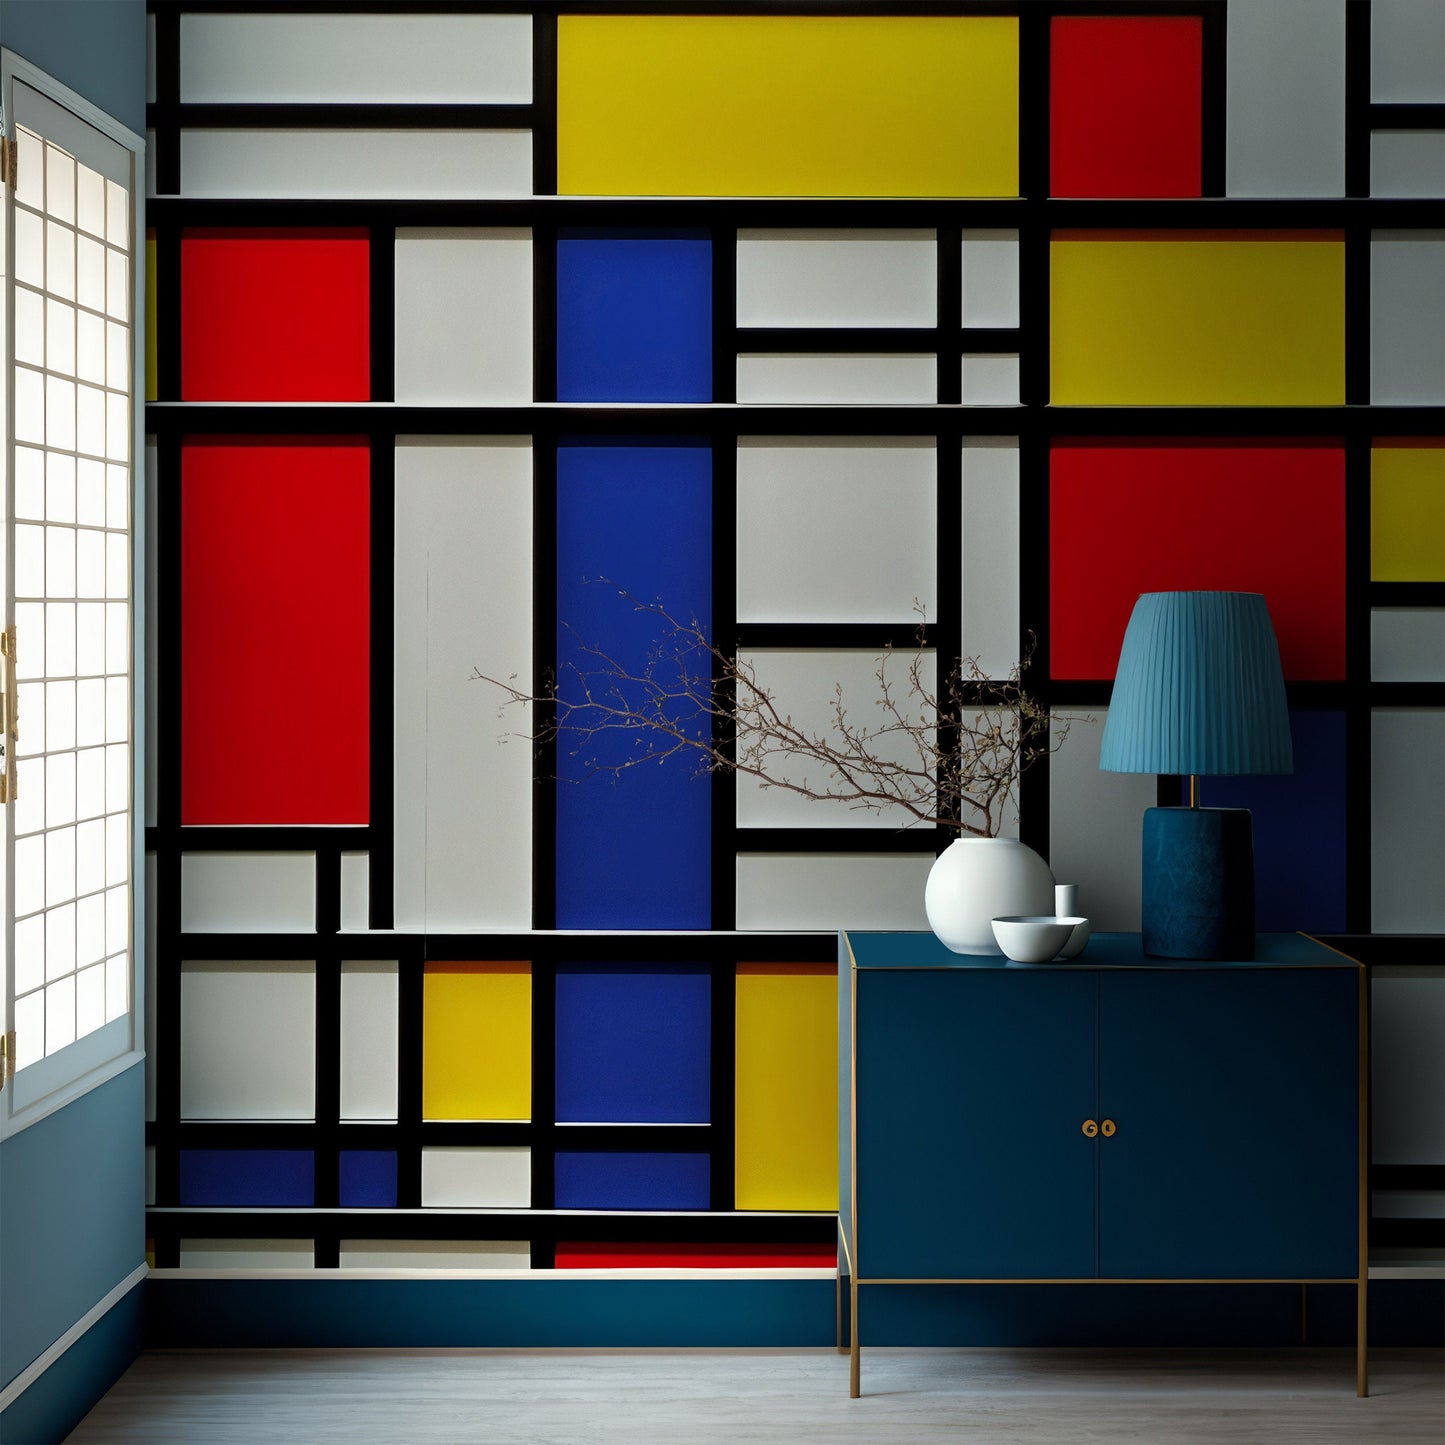 Mondrian Wallpaper | Colourful Geometric Removable Wallpaper | Abstract Art Peel and Stick Wallpaper | Neoplasticism Mural | Eco-friendly